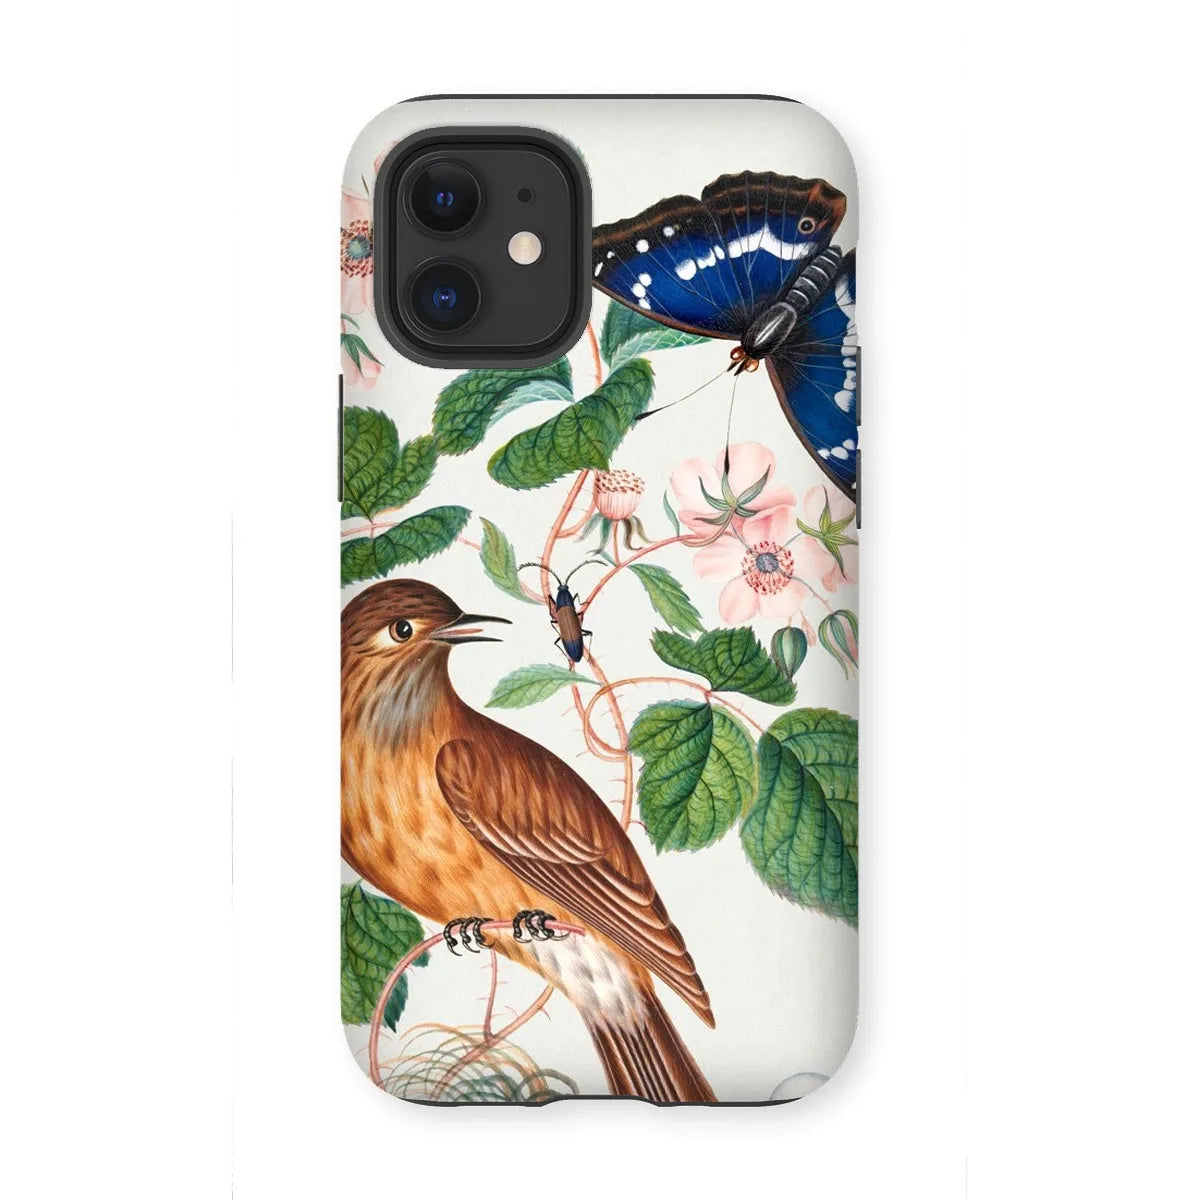 Flycatcher Emperor And Beetle - Art Phone Case - James Bolton - Iphone 12 Mini / Matte - Mobile Phone Cases - Aesthetic